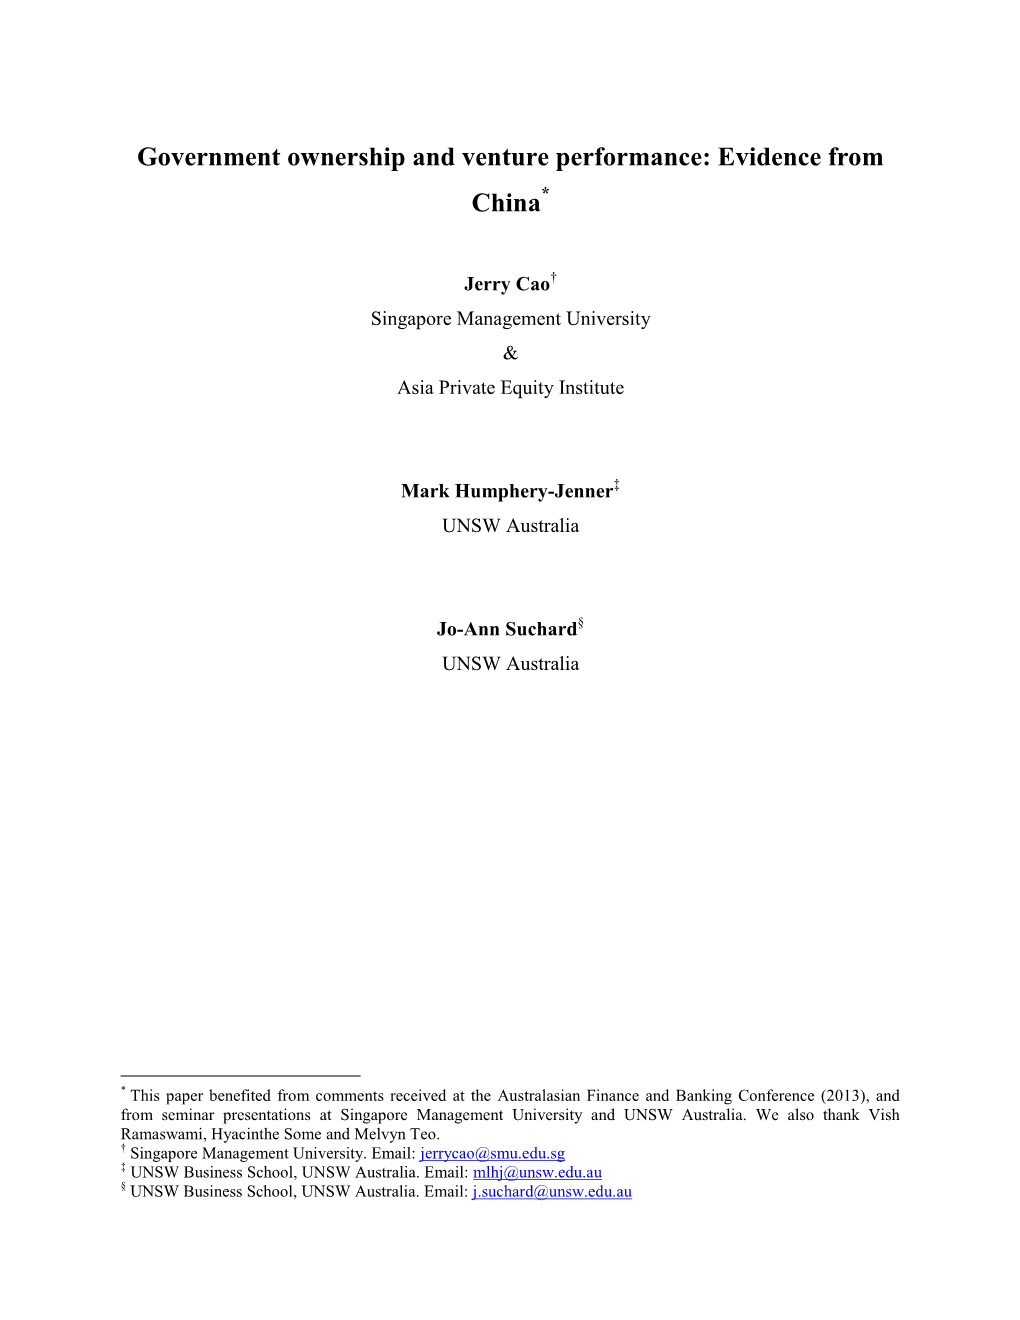 Government Ownership and Venture Performance: Evidence from China*